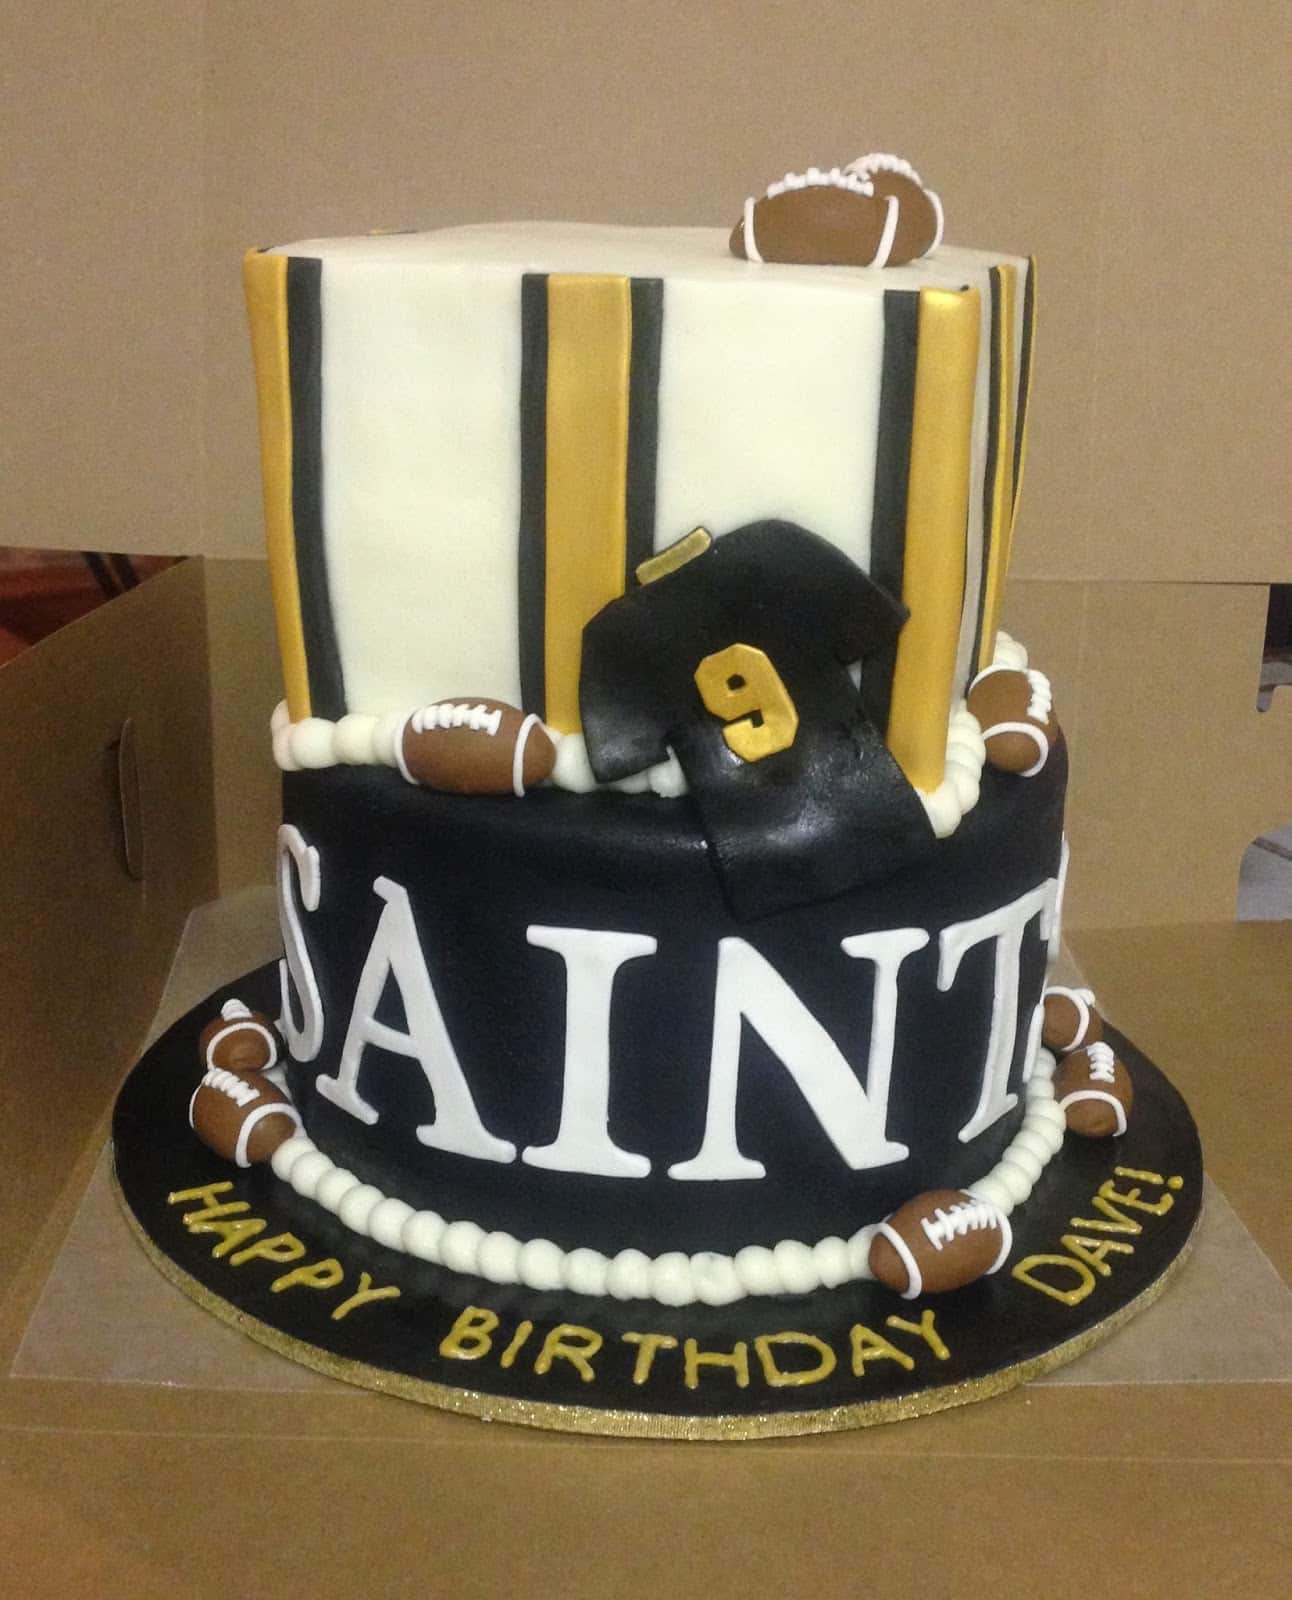 Cakes by Mindy: New Orleans Saints Cake 6"  &  8"